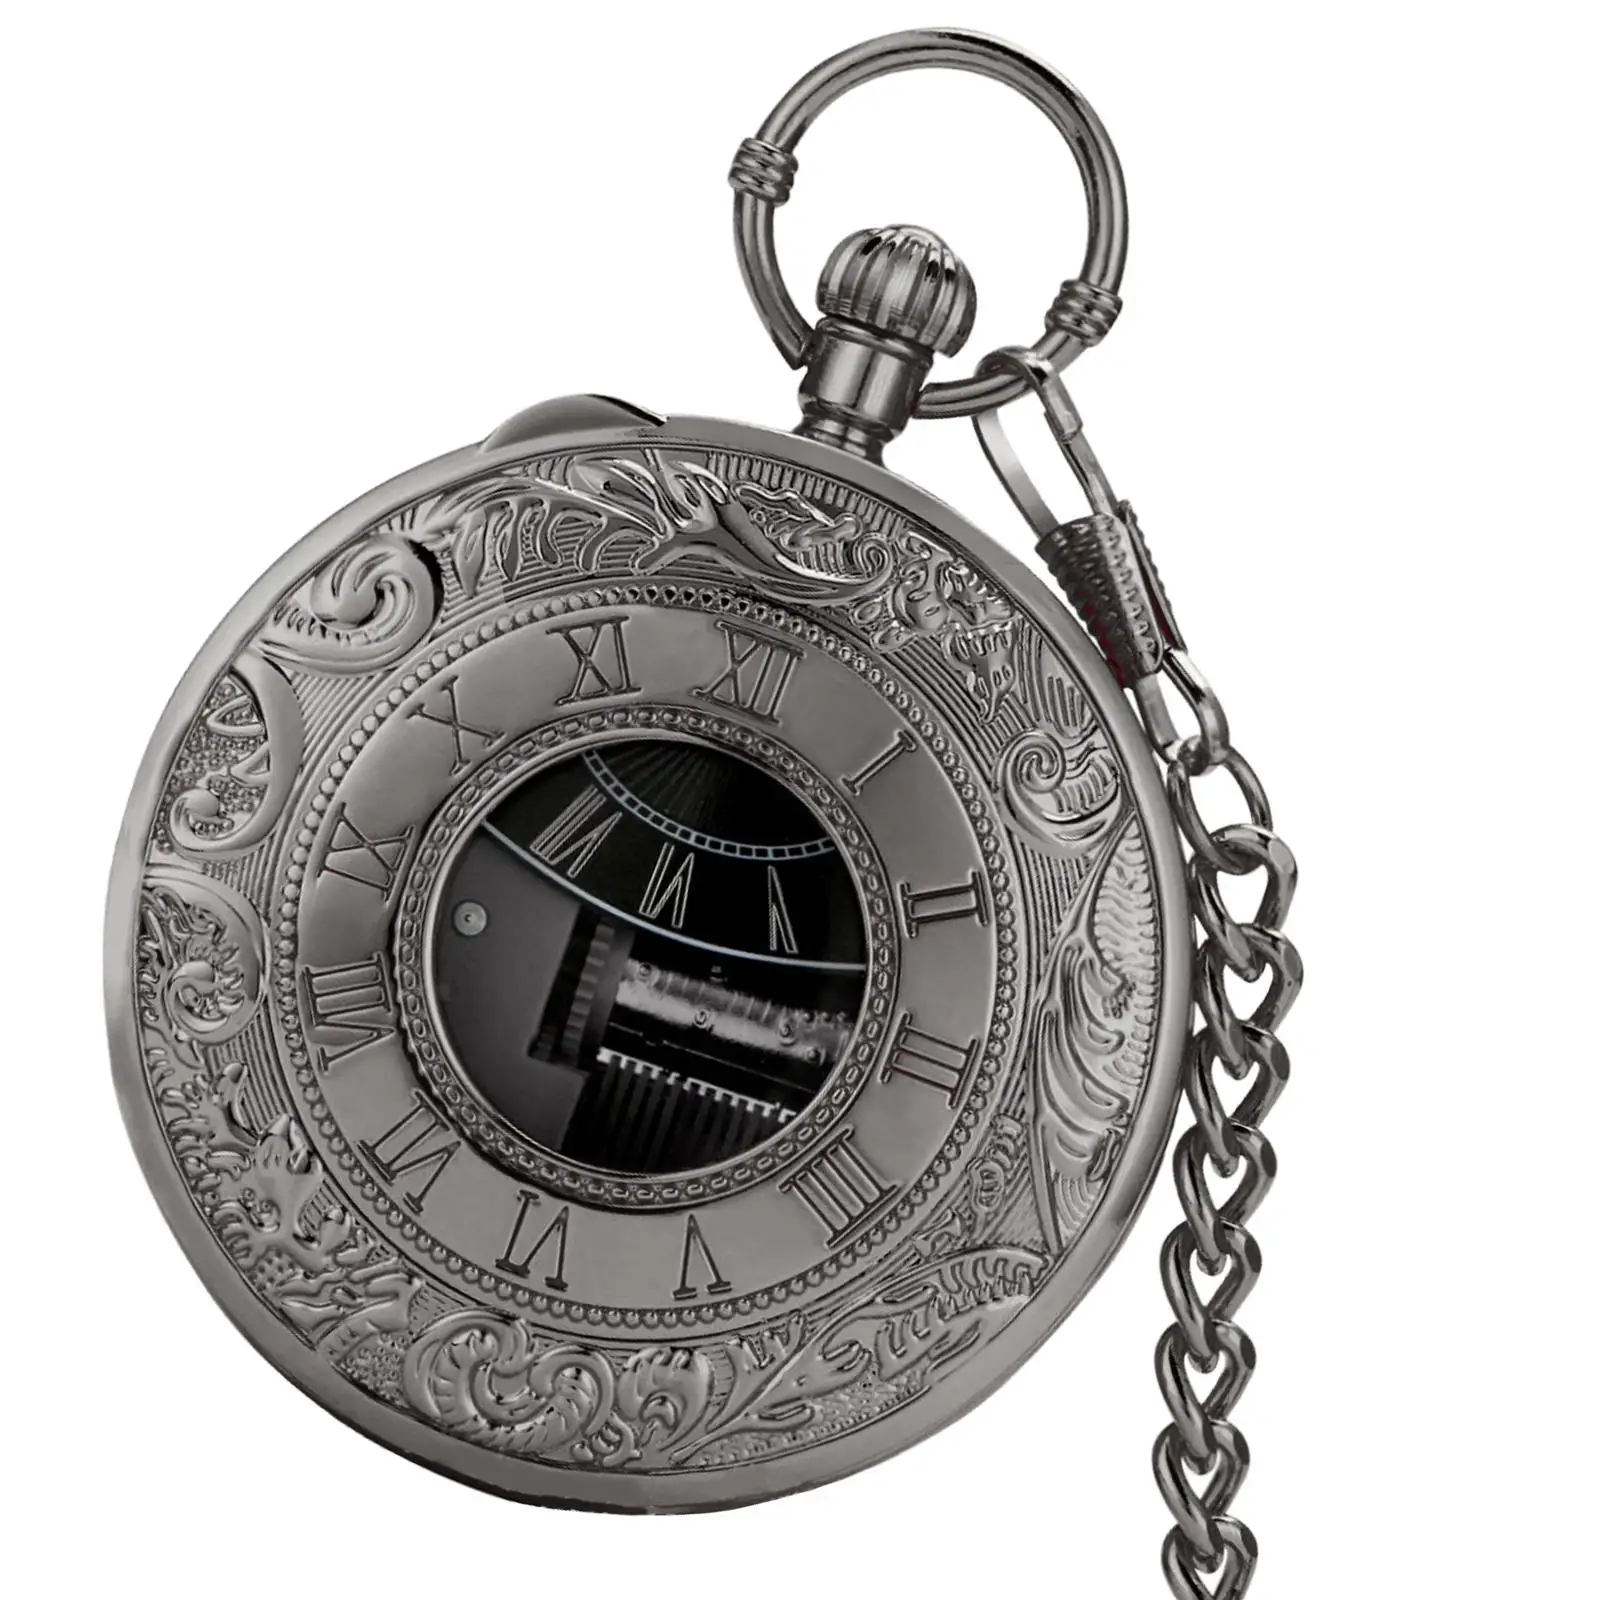 Vintage  Pocket Watch with Chain Musical Movement Roman Numeral Display Fashion